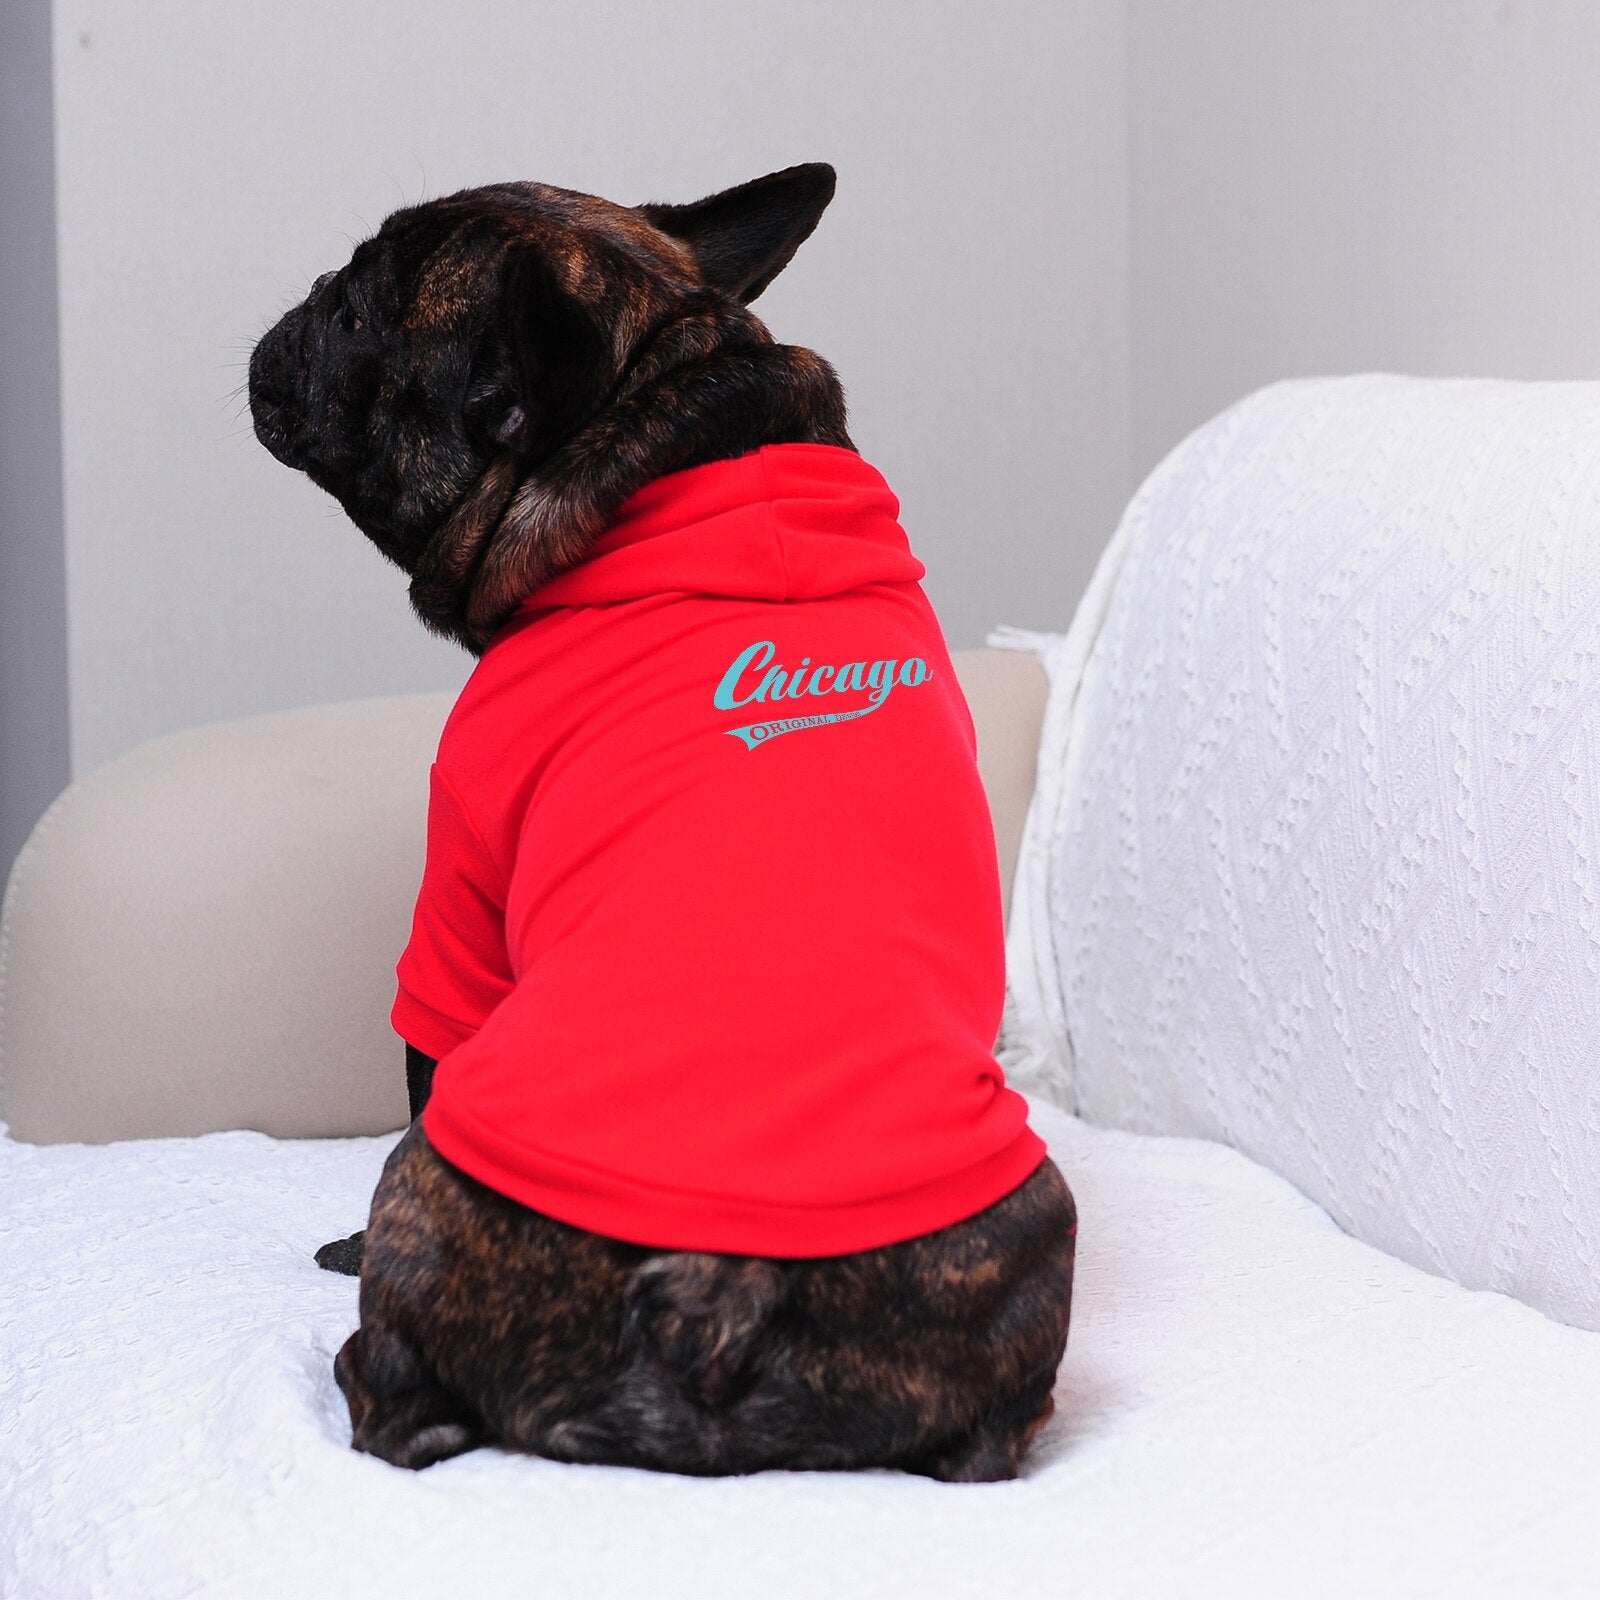 Hoodies for Dogs Small Medium Big Cat Pet， Leash Hole and Soft Warm Cotton Fabric, Suitable for Boys and Girls Puppies